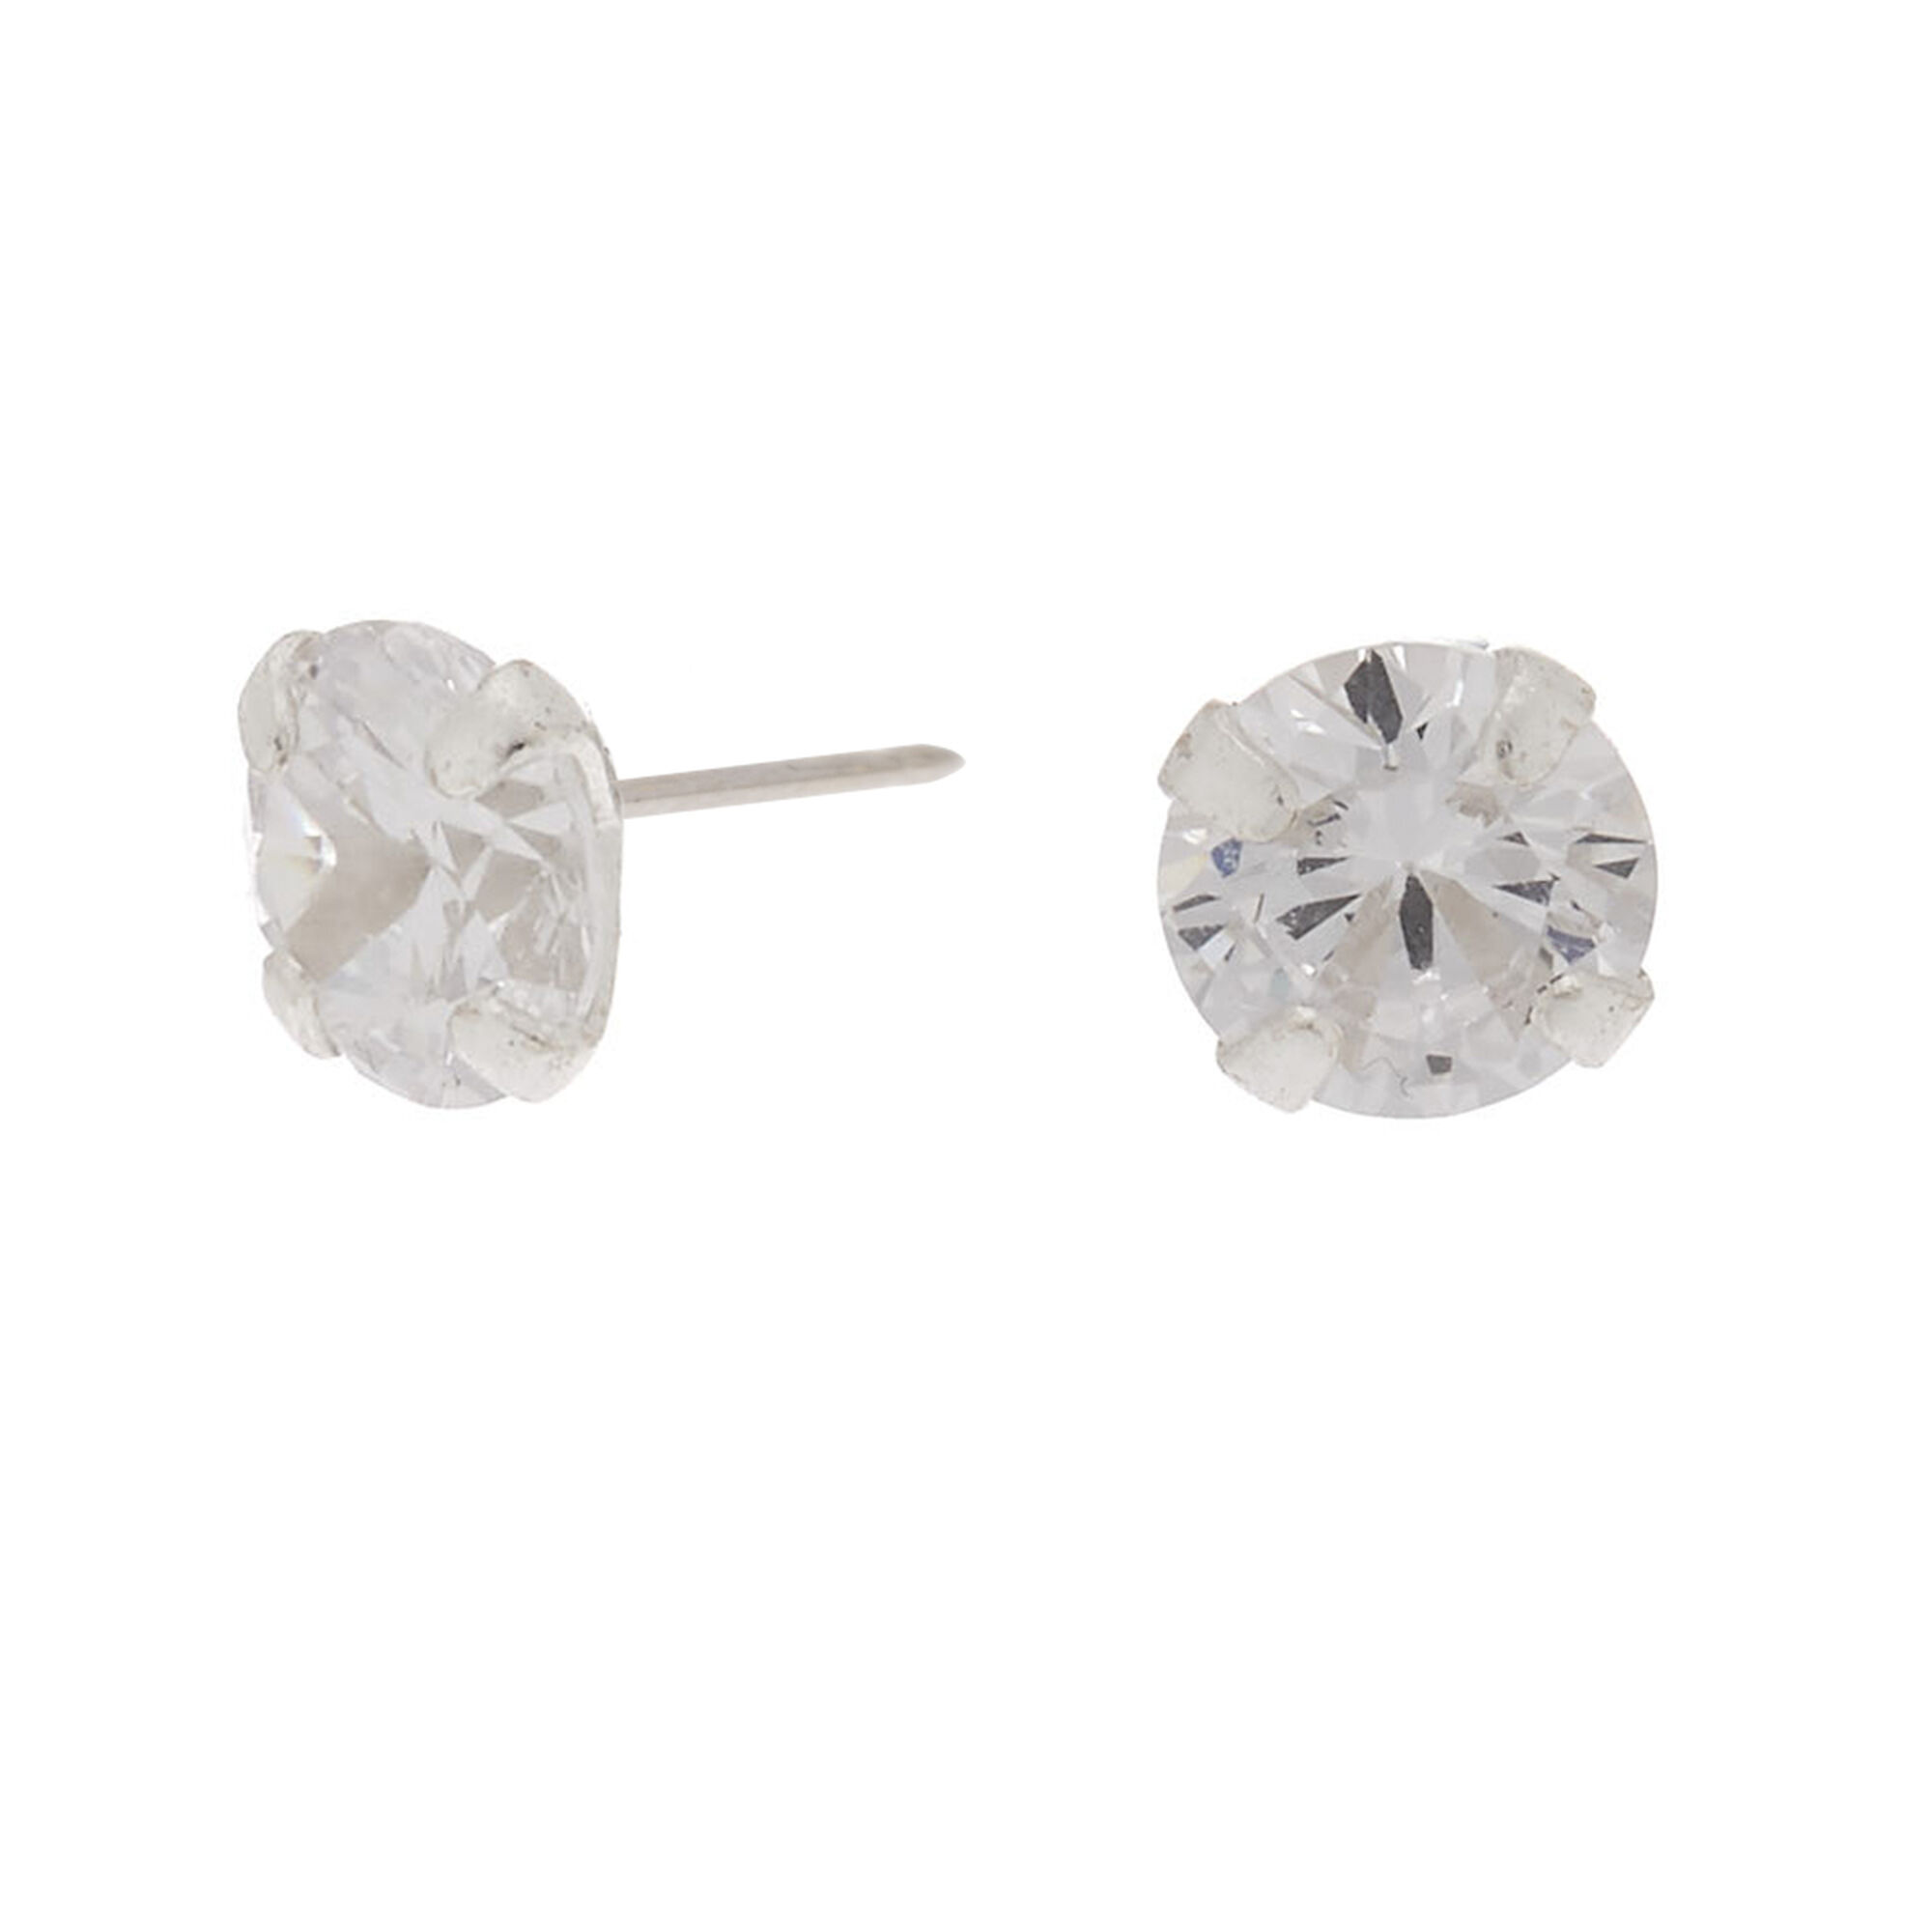 View Claires Cubic Zirconia 5MM Round Martini Stud Earrings Silver information